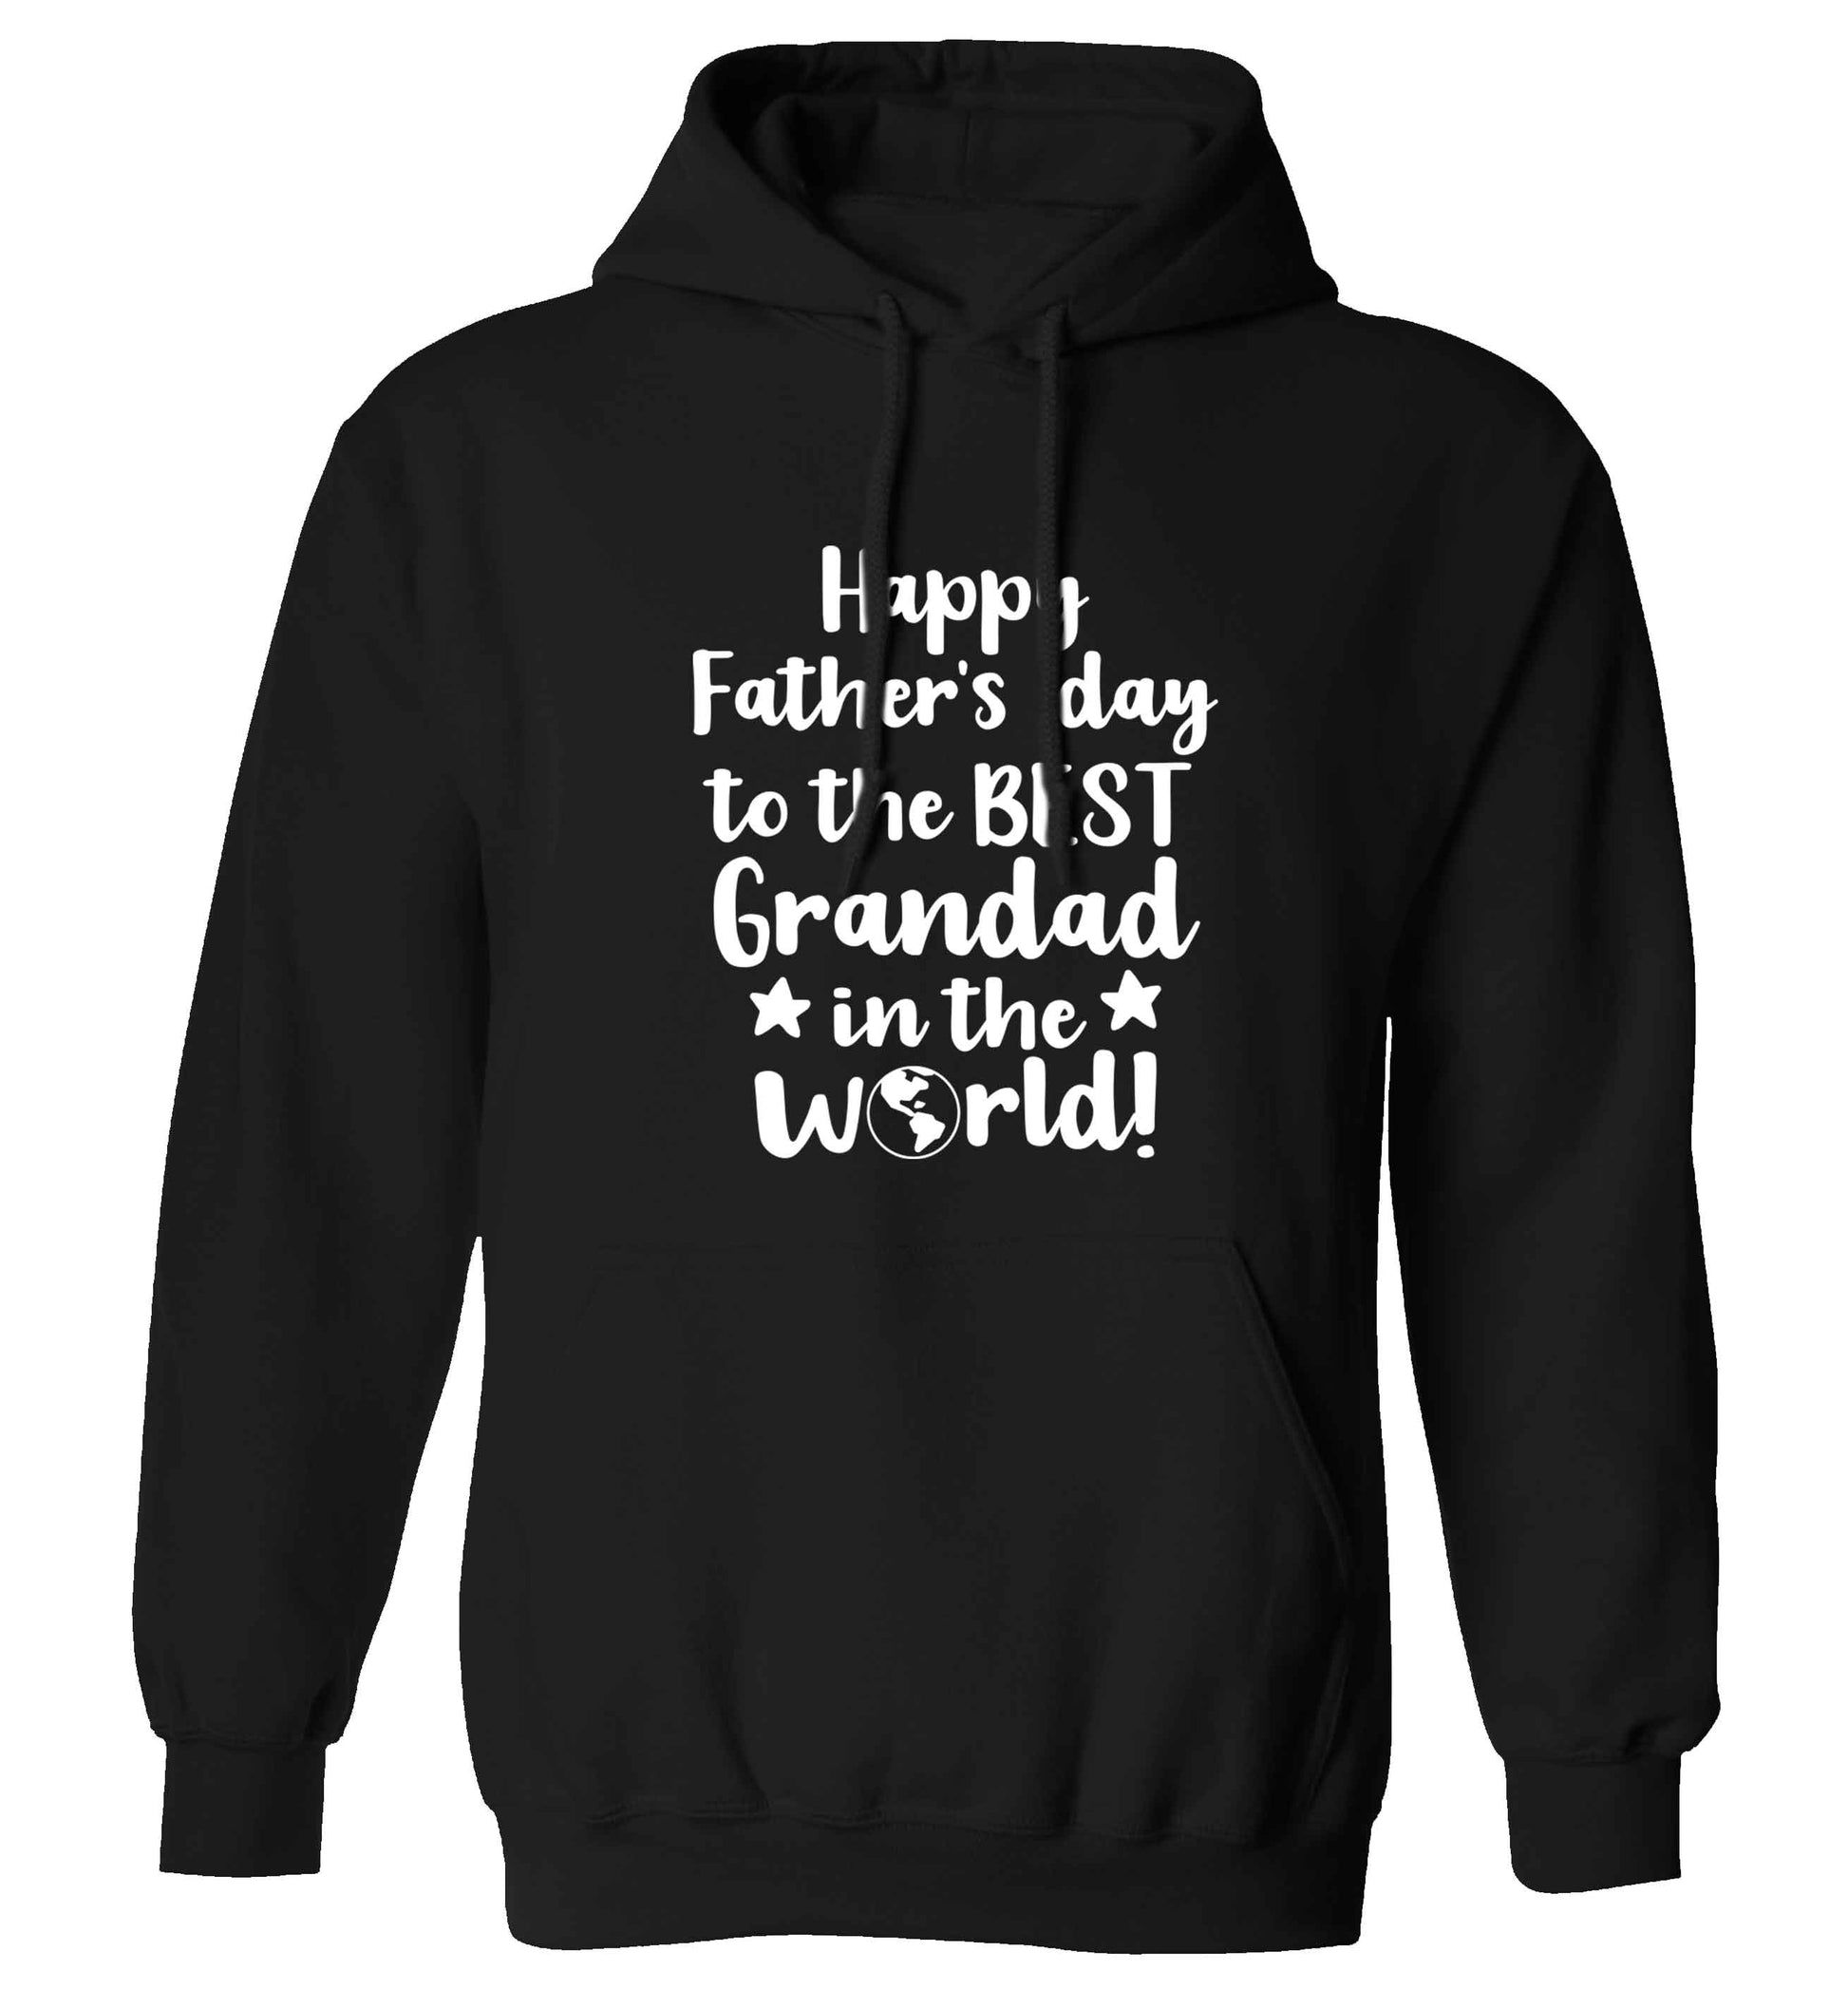 Happy Father's day to the best grandad in the world adults unisex black hoodie 2XL